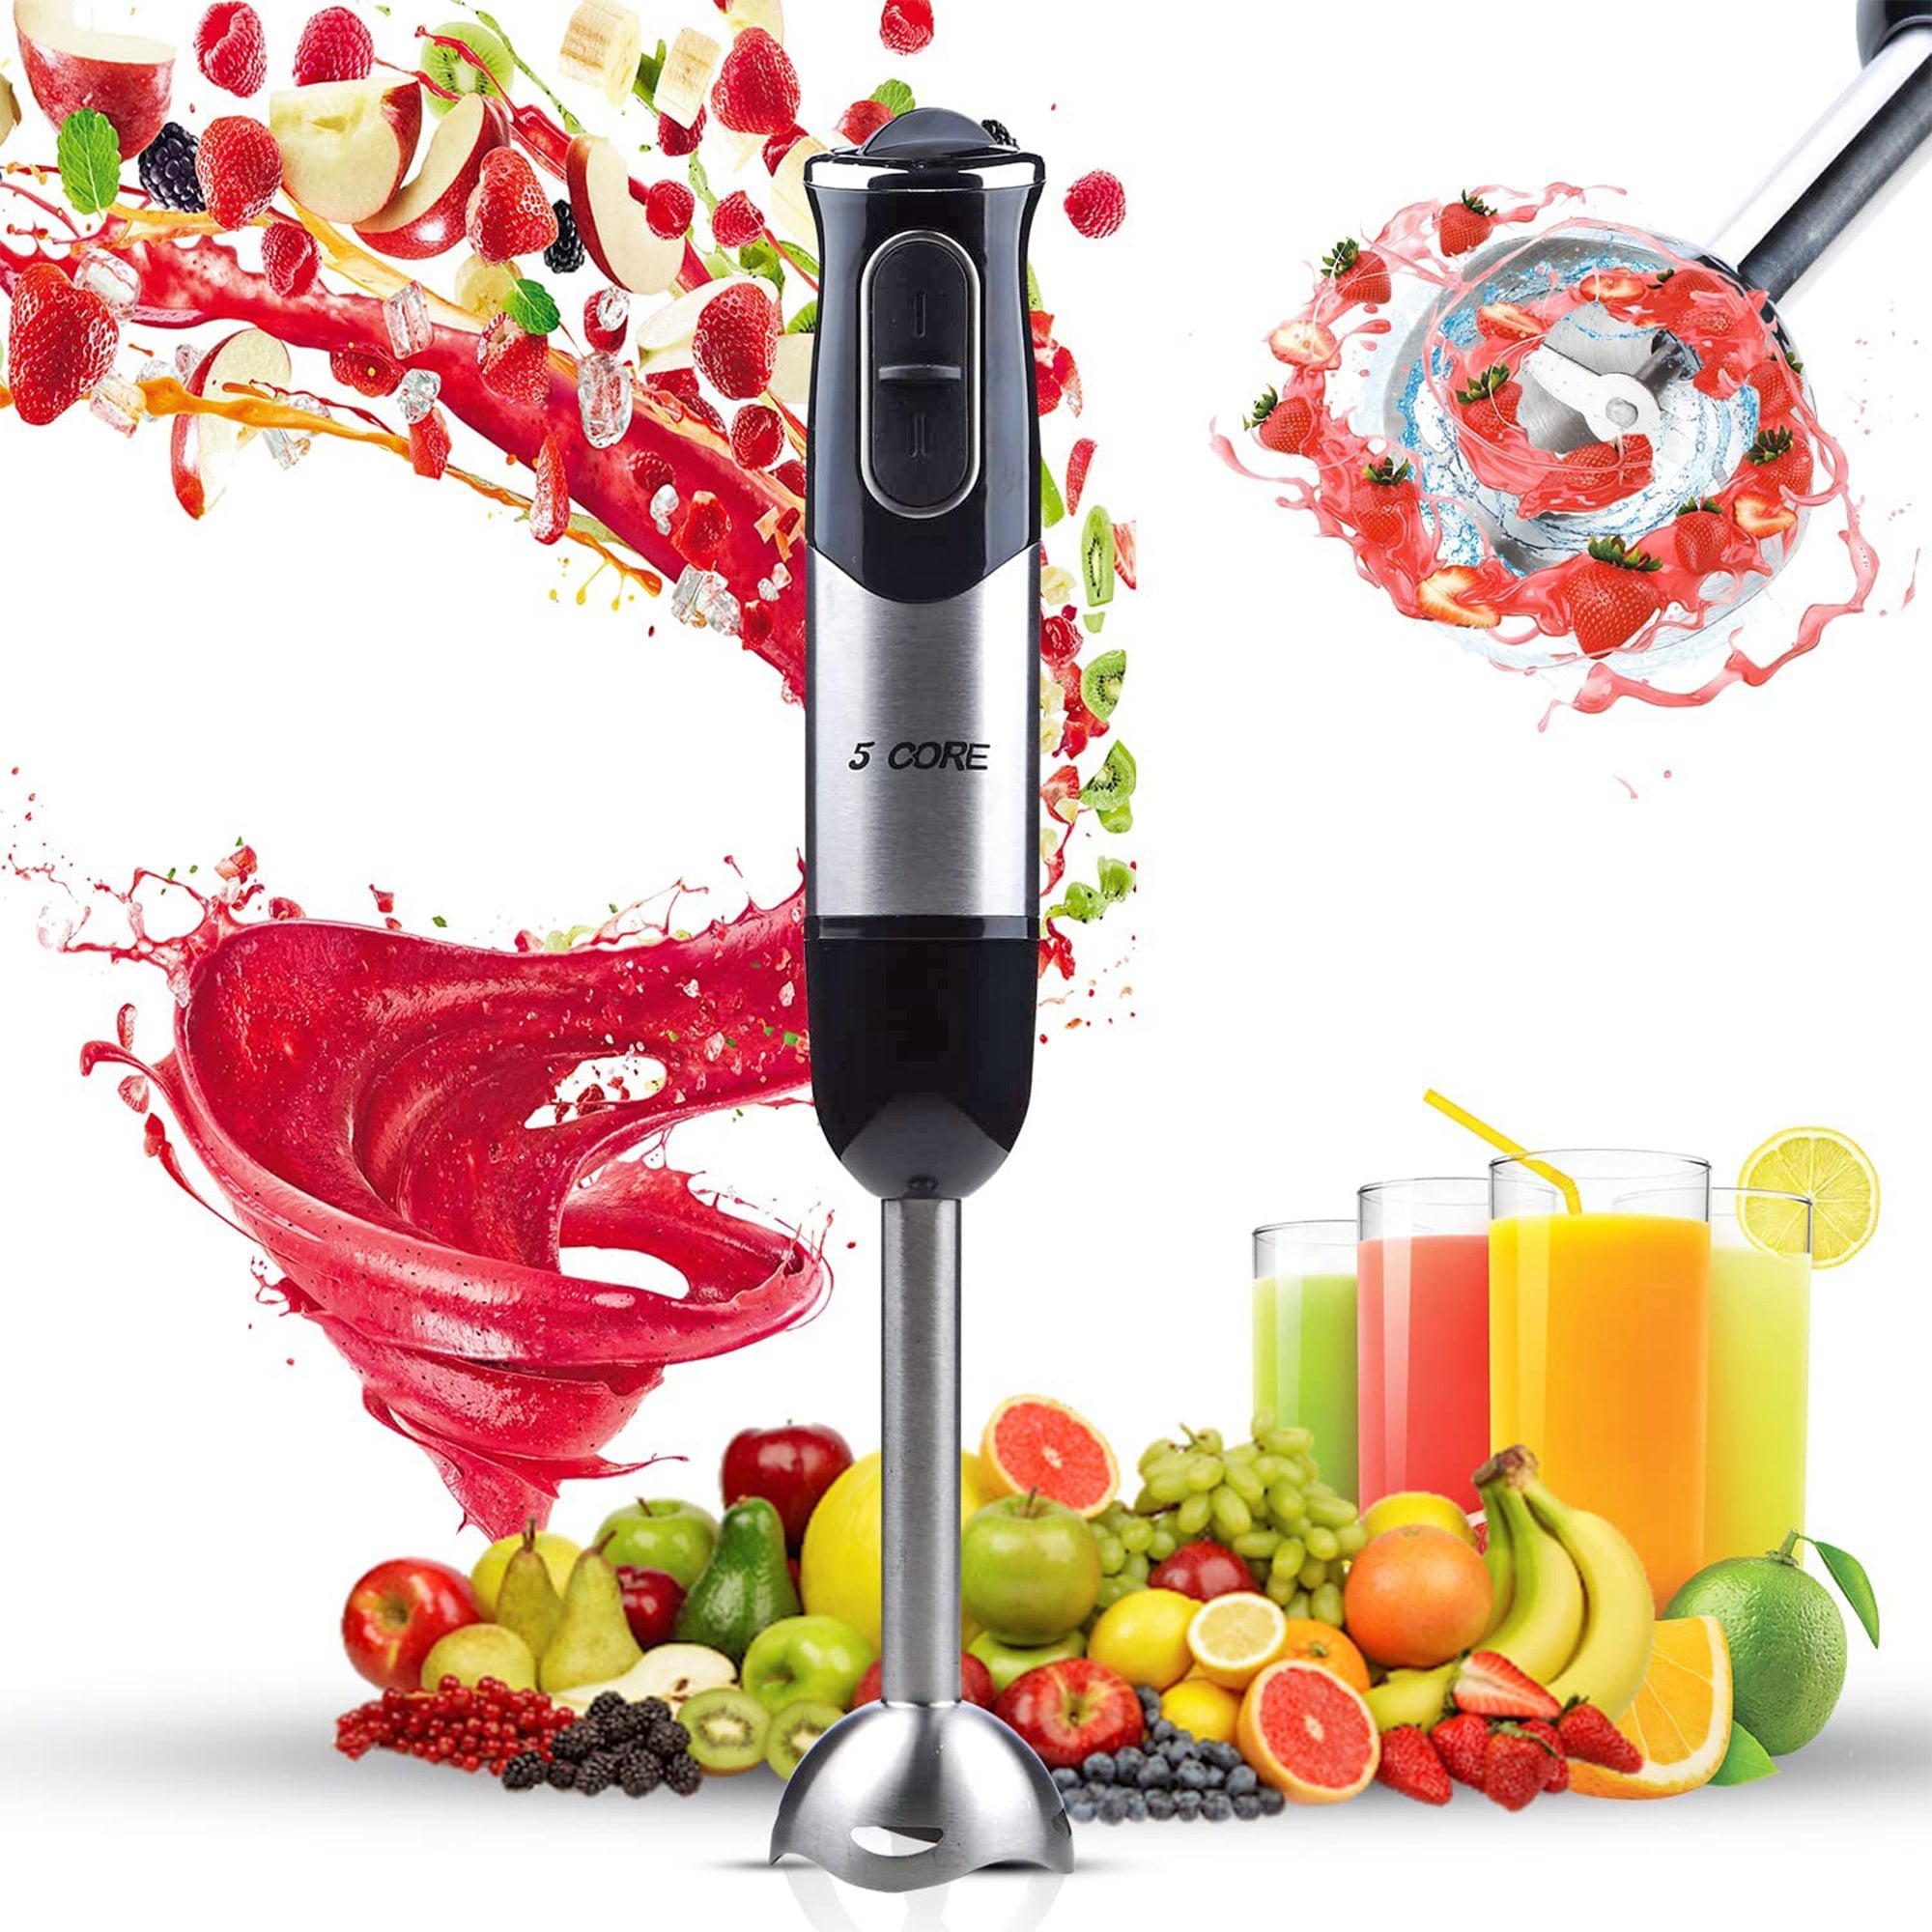 A Hand Held Blender Stick 500 WATT Immersion 2 Speed Turbo Mixer 2 Titanium Blades HB 1510 surrounded by fruits and juices.